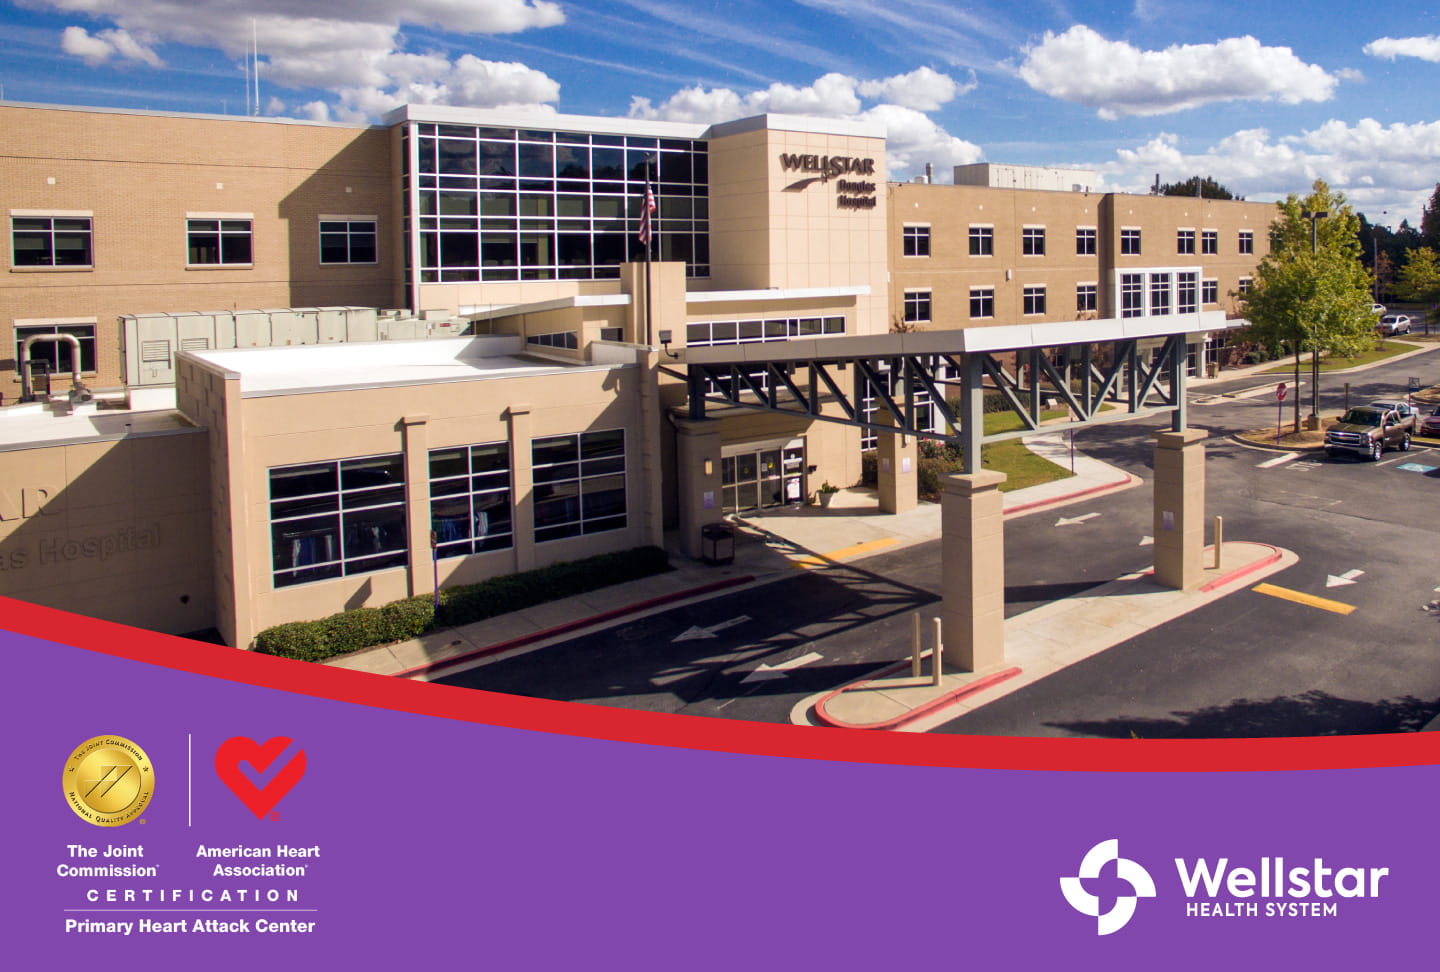 Exterior photo of Wellstar Douglas Hospital, Joint Commission and American Heart Association logos and text reads "Certification Primary Heart Attack Center." Wellstar logo at bottom right